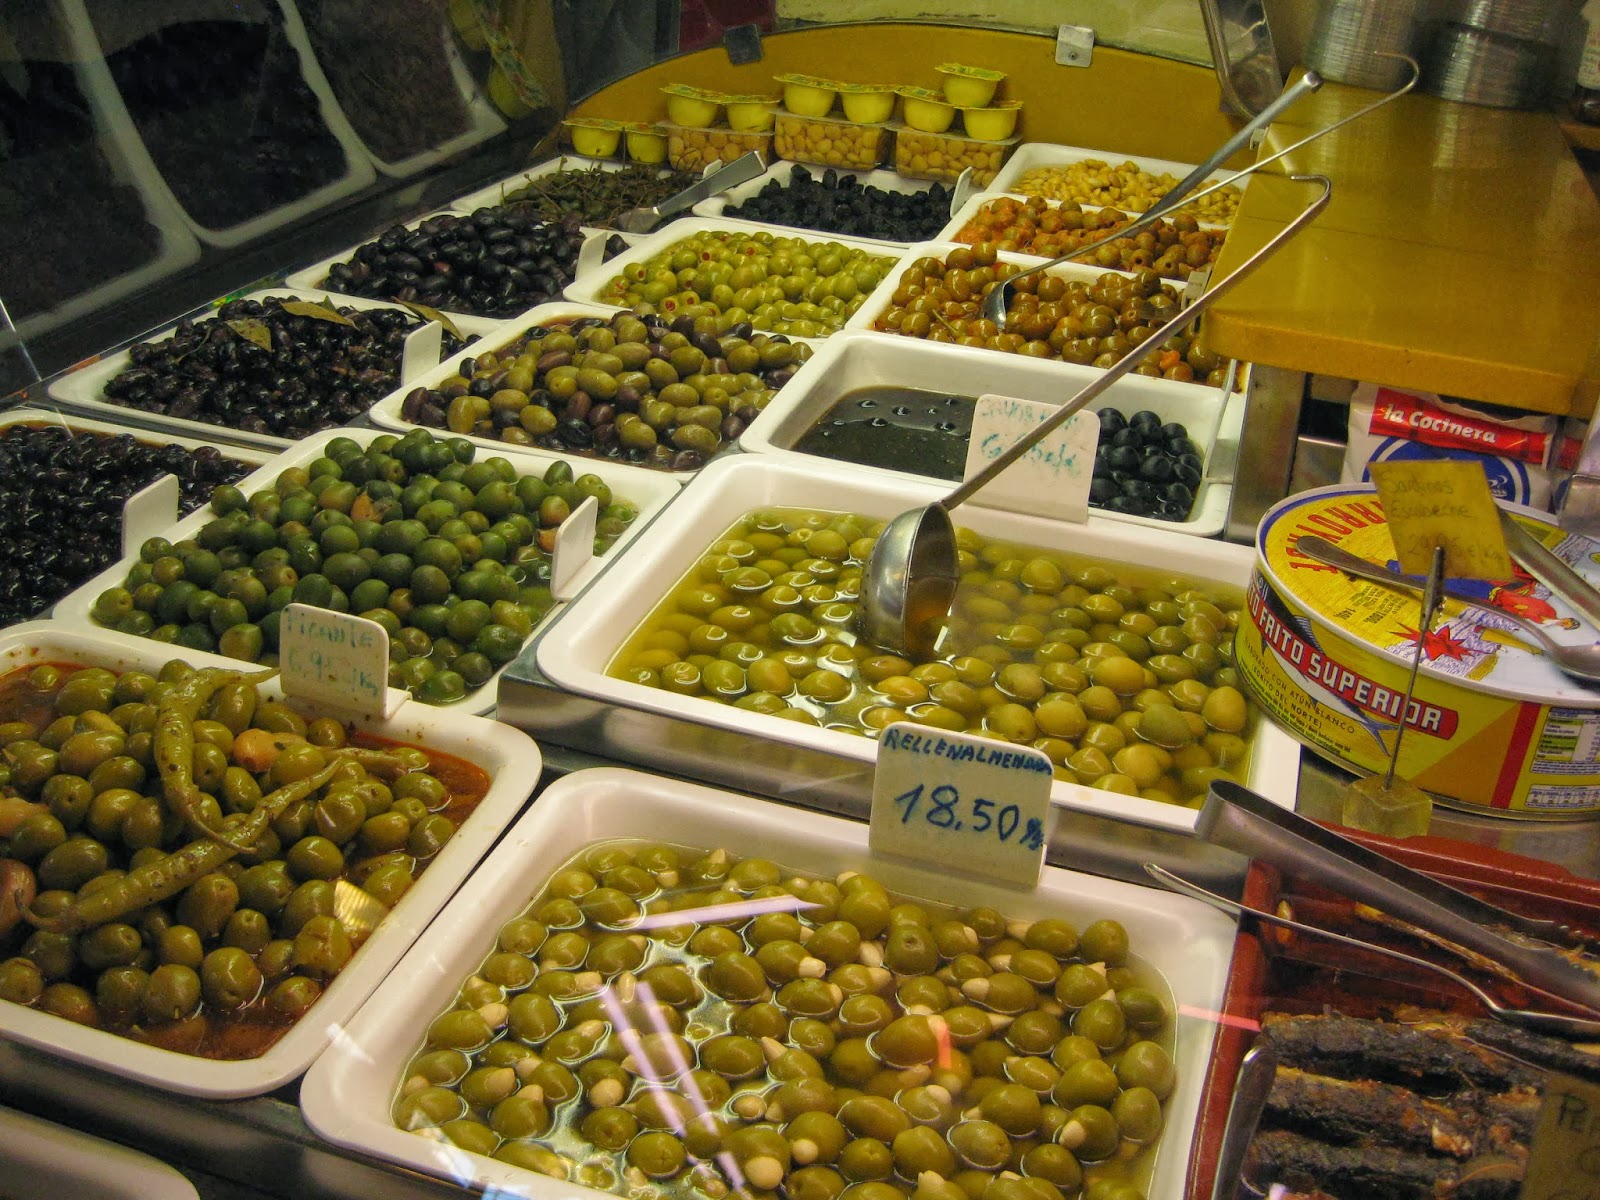 Barcelona - you can find all types of olives at La Boqueria market